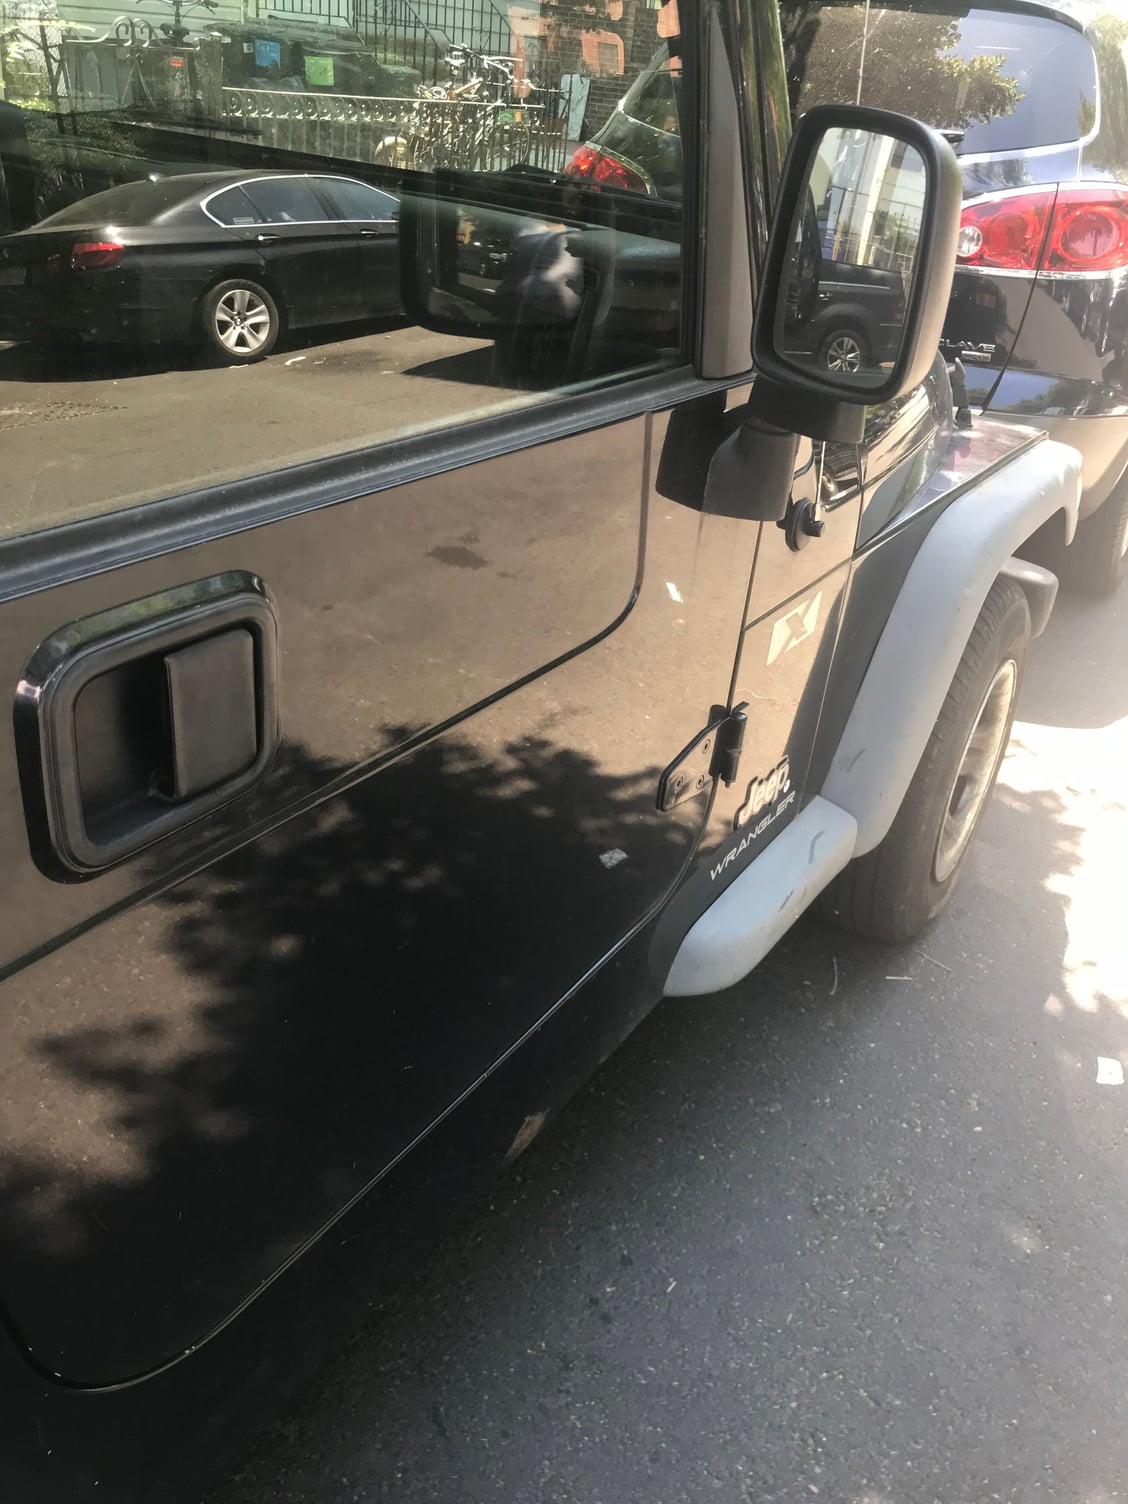 2005 Jeep Wrangler - 2005 Jeep Wrangler X for Sale - NYC area - Used - VIN 1J4FA39S65P349492 - 112,000 Miles - 6 cyl - 4WD - Automatic - SUV - Black - Brooklyn, NY 11213, United States